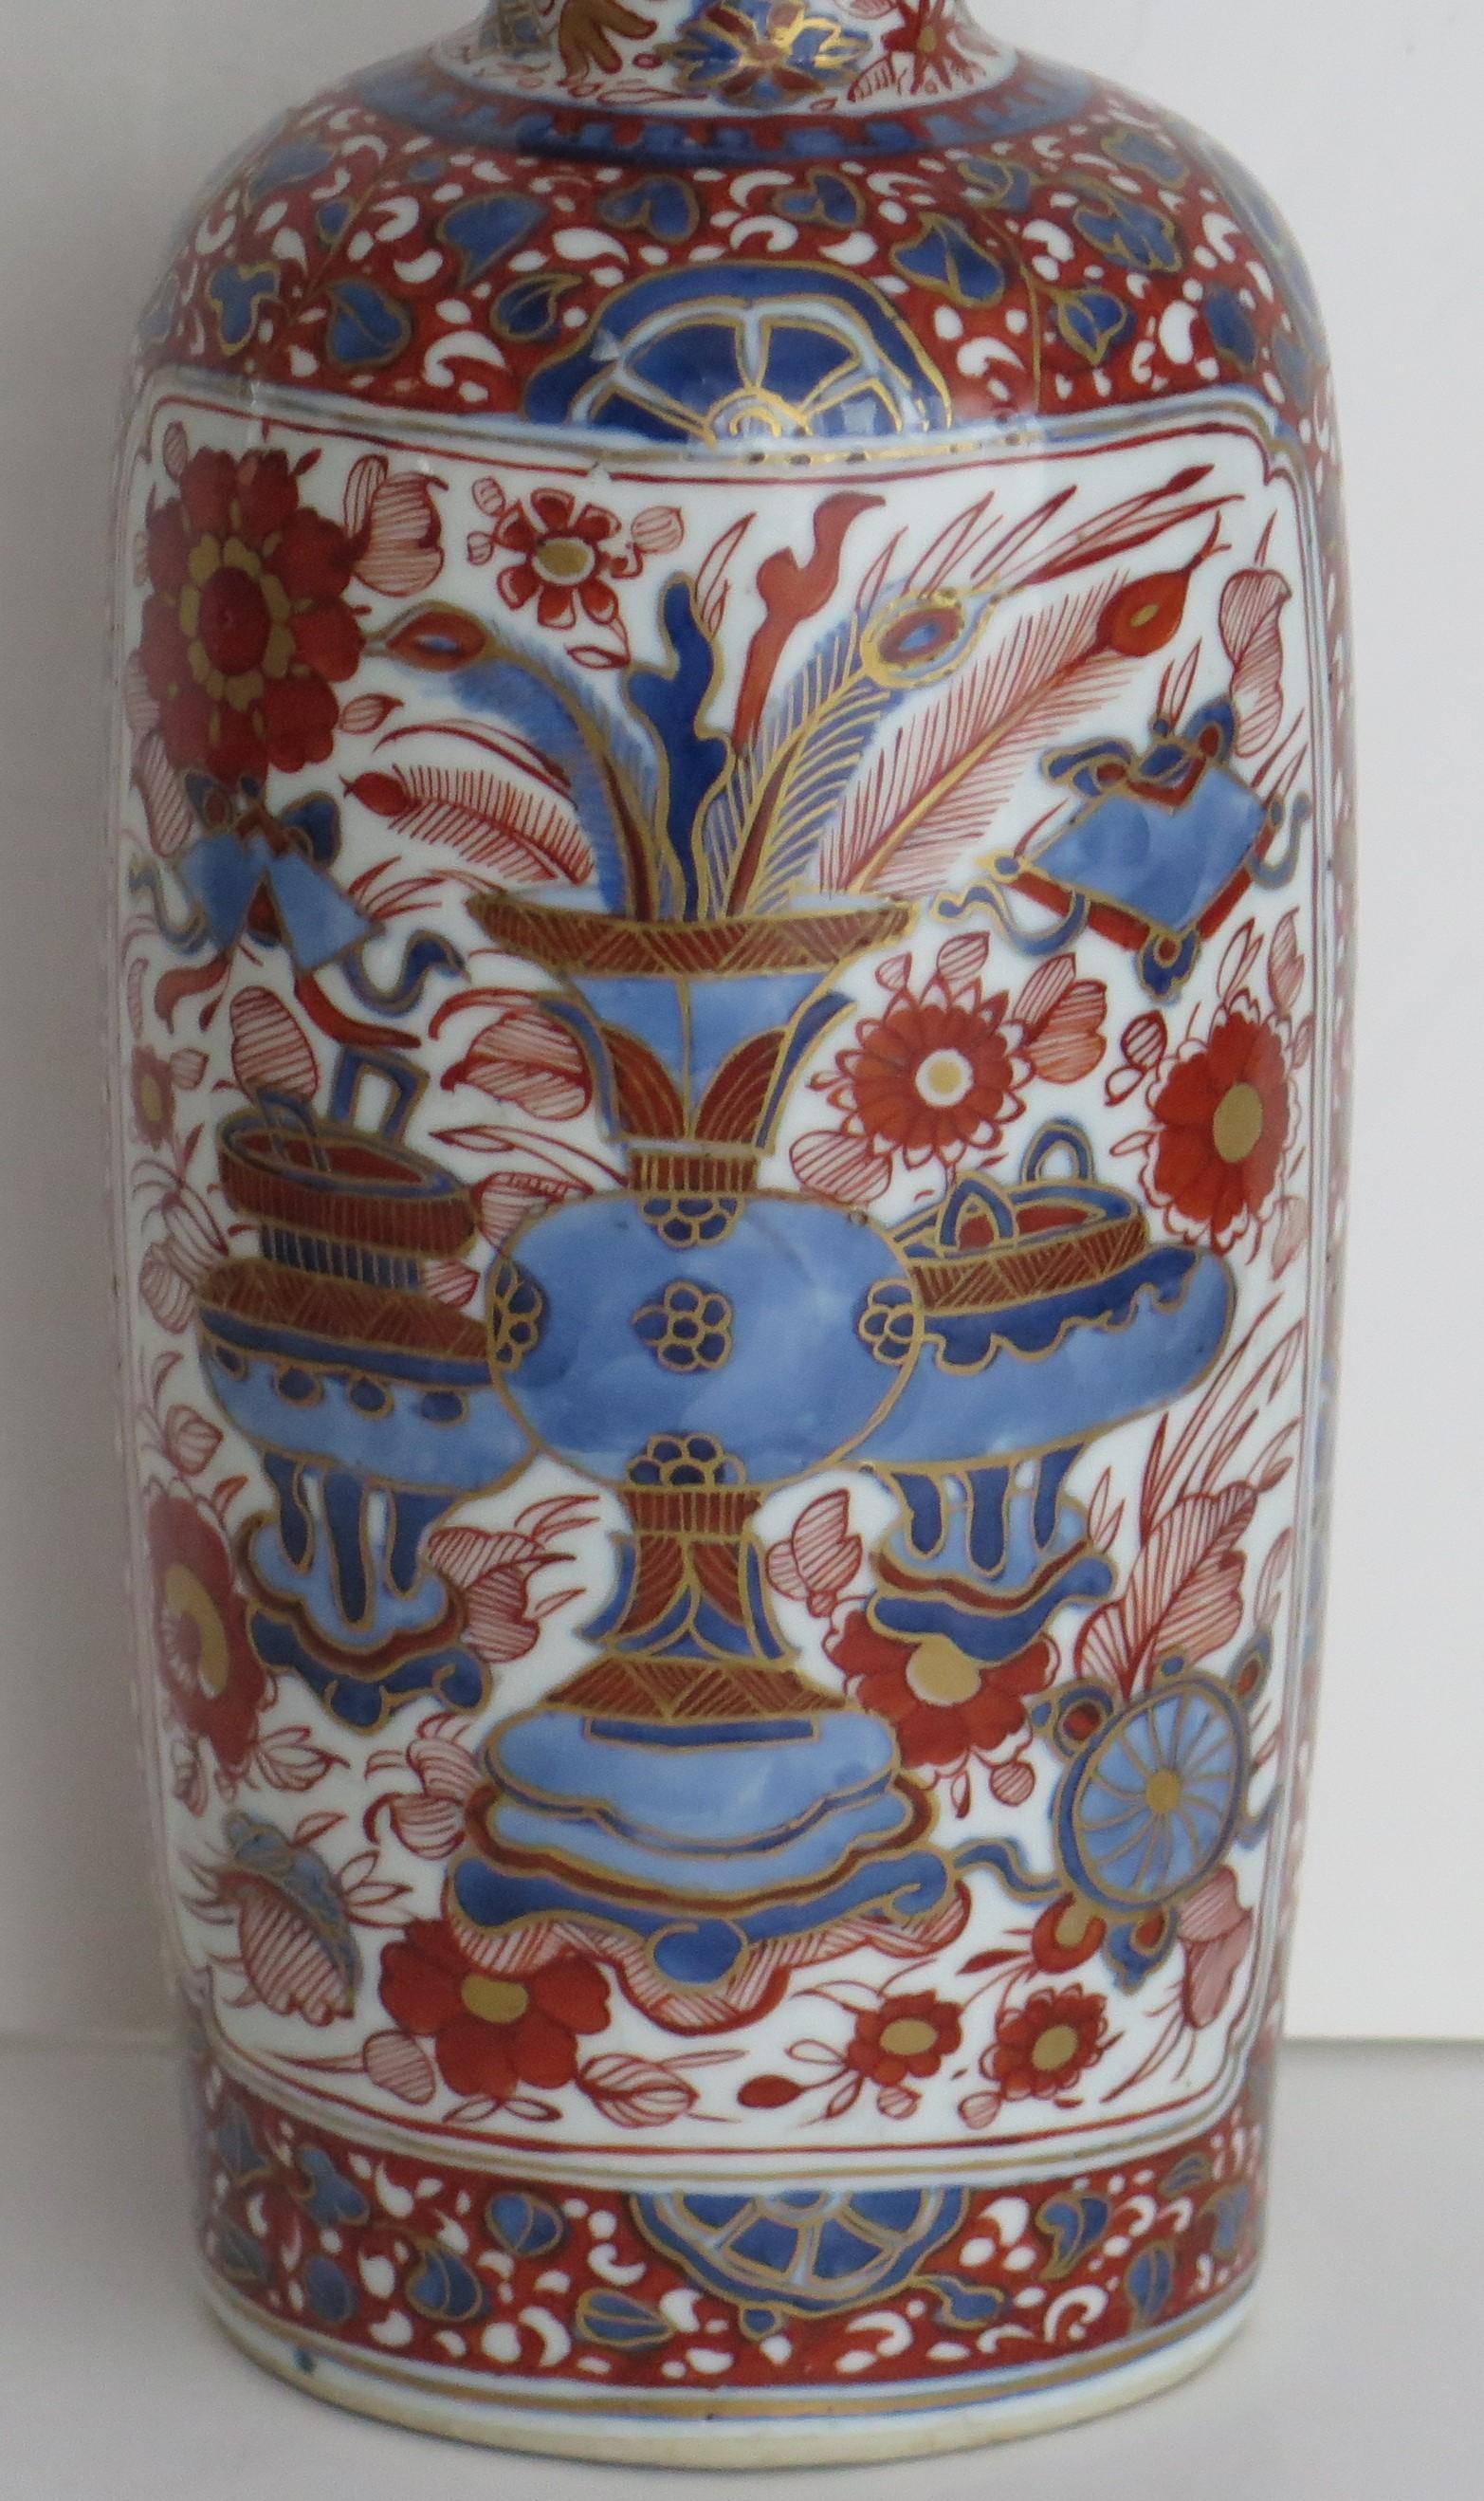 A very beautiful high quality Chinese porcelain Bottle Vase. dating to the Qing Dynasty, Kangxi emperor ( 1662 to 1722).

A well potted bottle Rouleau Vase with a rare garlic neck. Rouleau shaped vases were particularly popular during the Kangxi